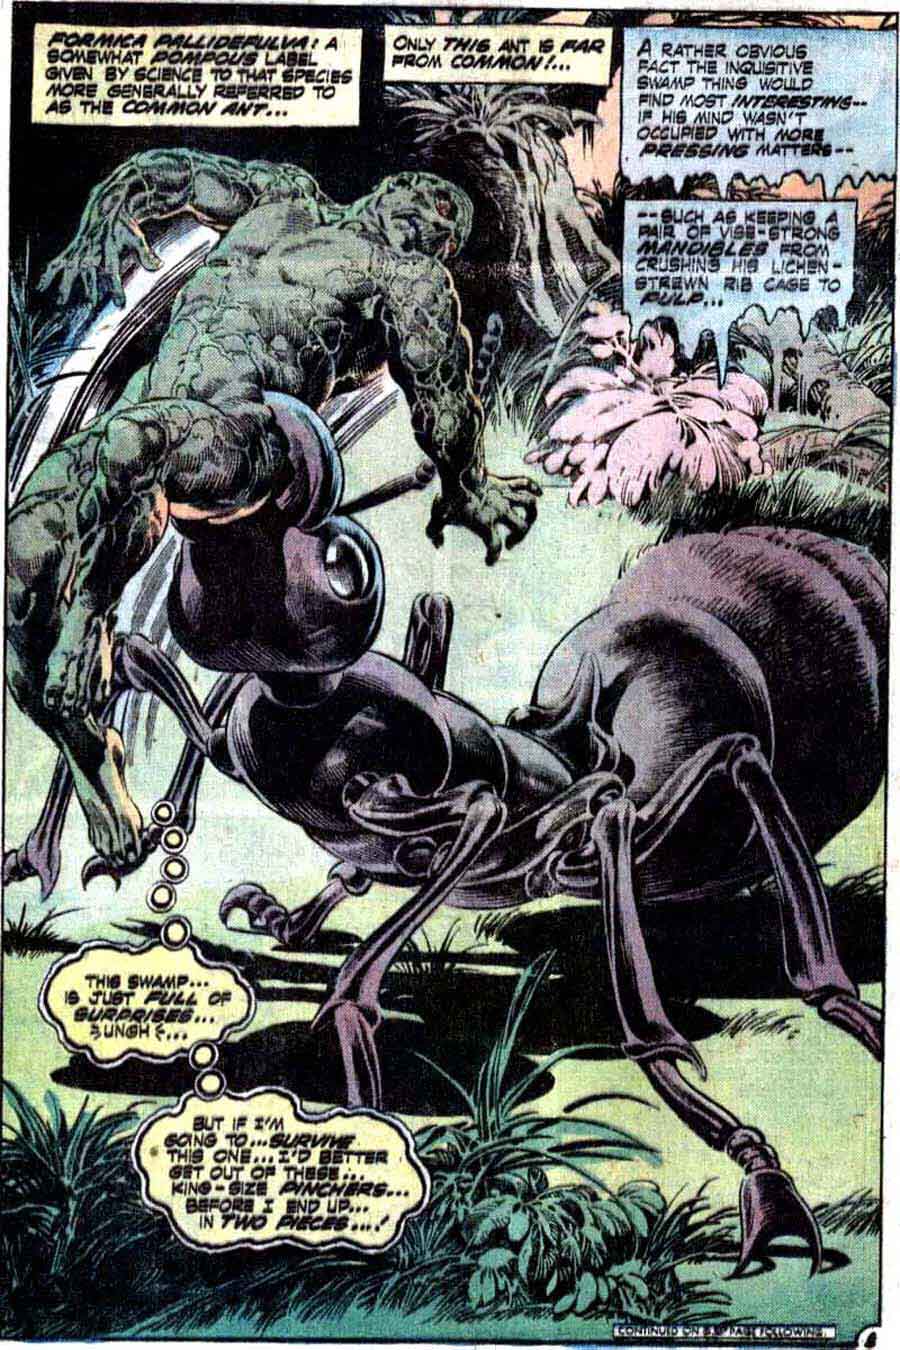 Swamp Thing v1 #14 1970s bronze age dc comic book page art by Nestor Redondo